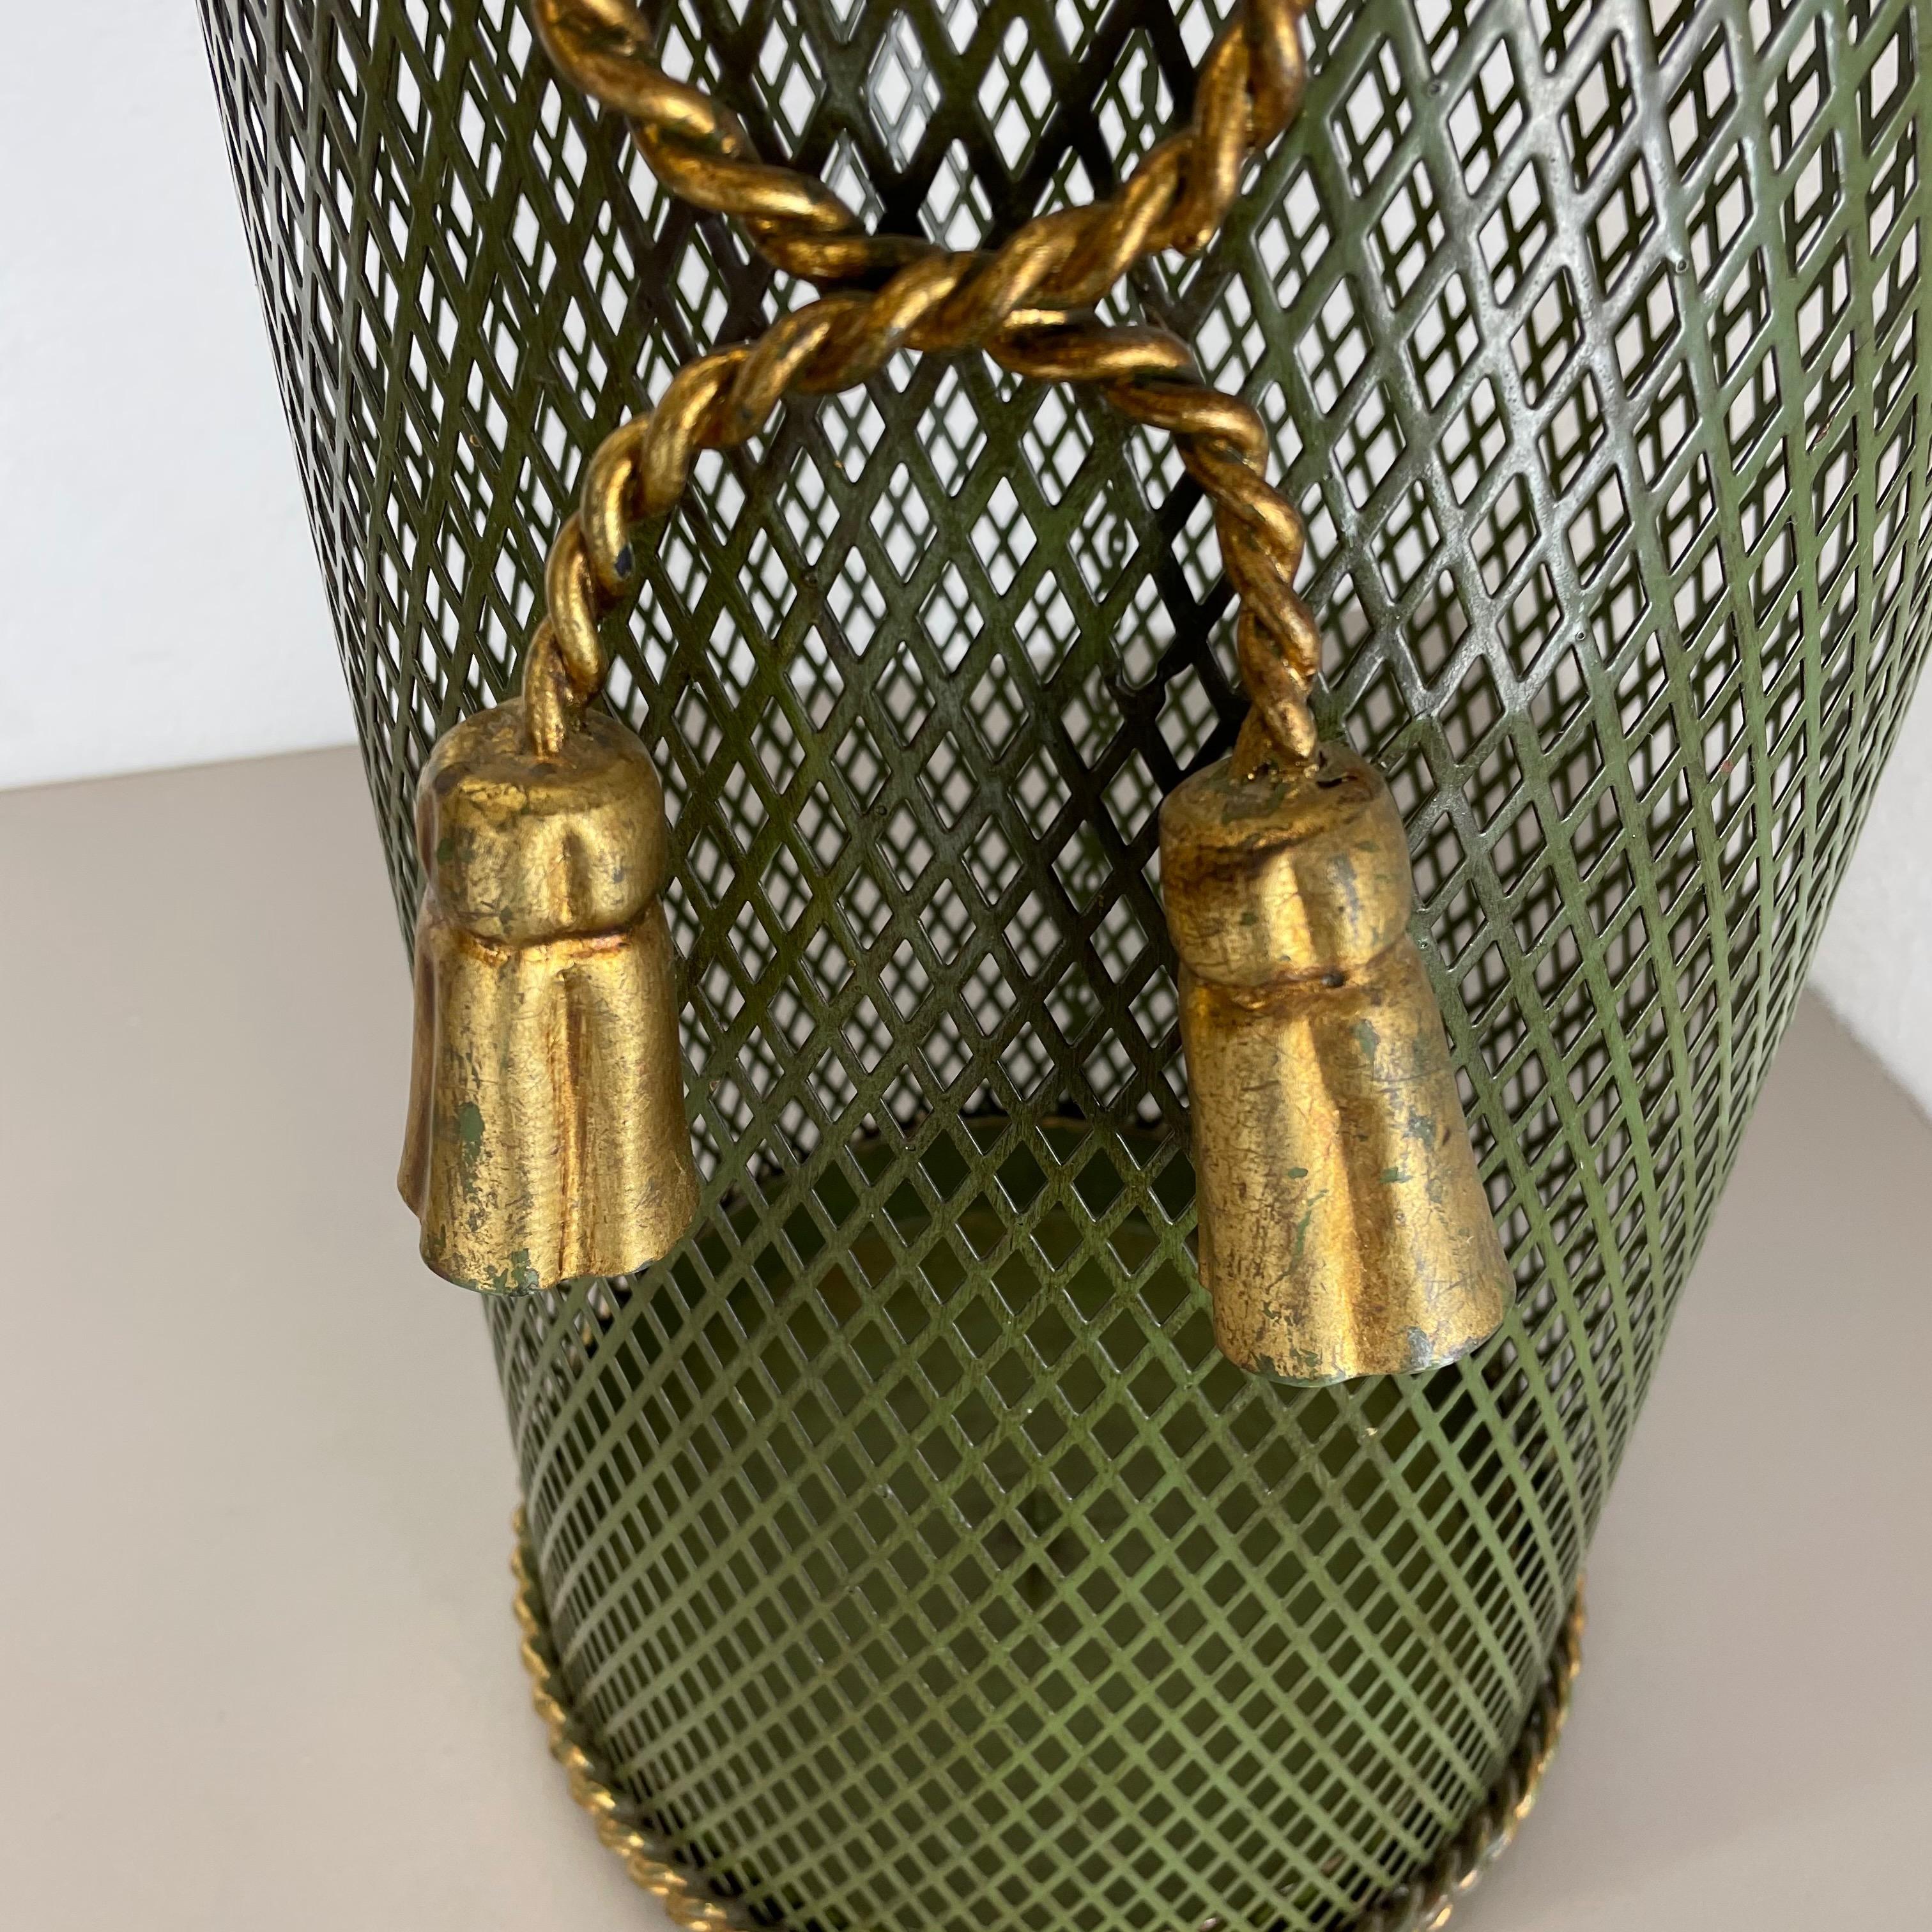 Hollywood Regency Gilded Metal Umbrella Stand by Li Puma, Firenze, Italy, 1950s For Sale 4